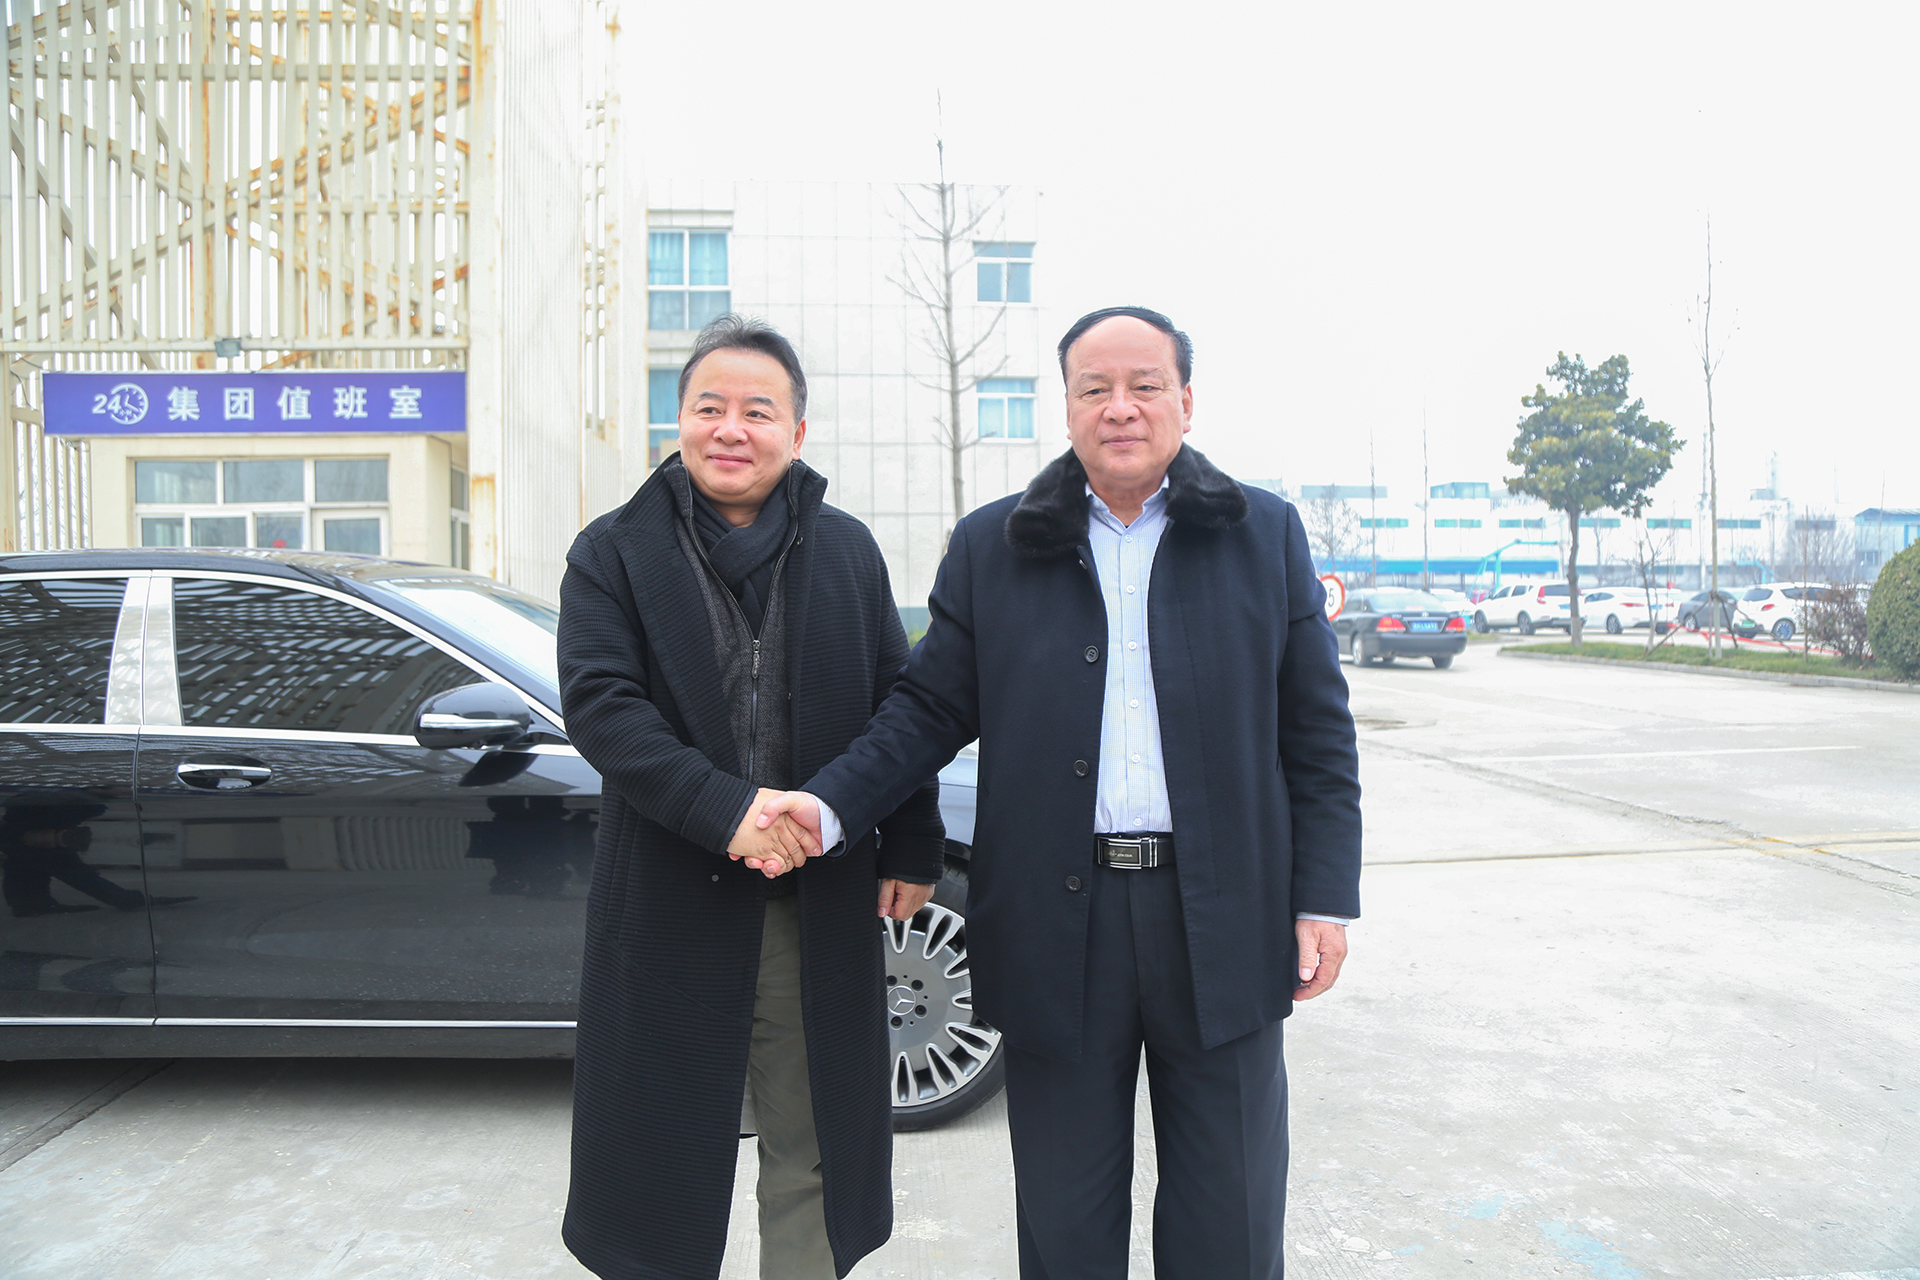 Warmly Welcome Chairman Shao Of The British Chinese Chamber Of Commerce To Visit Sshandong Tiandun